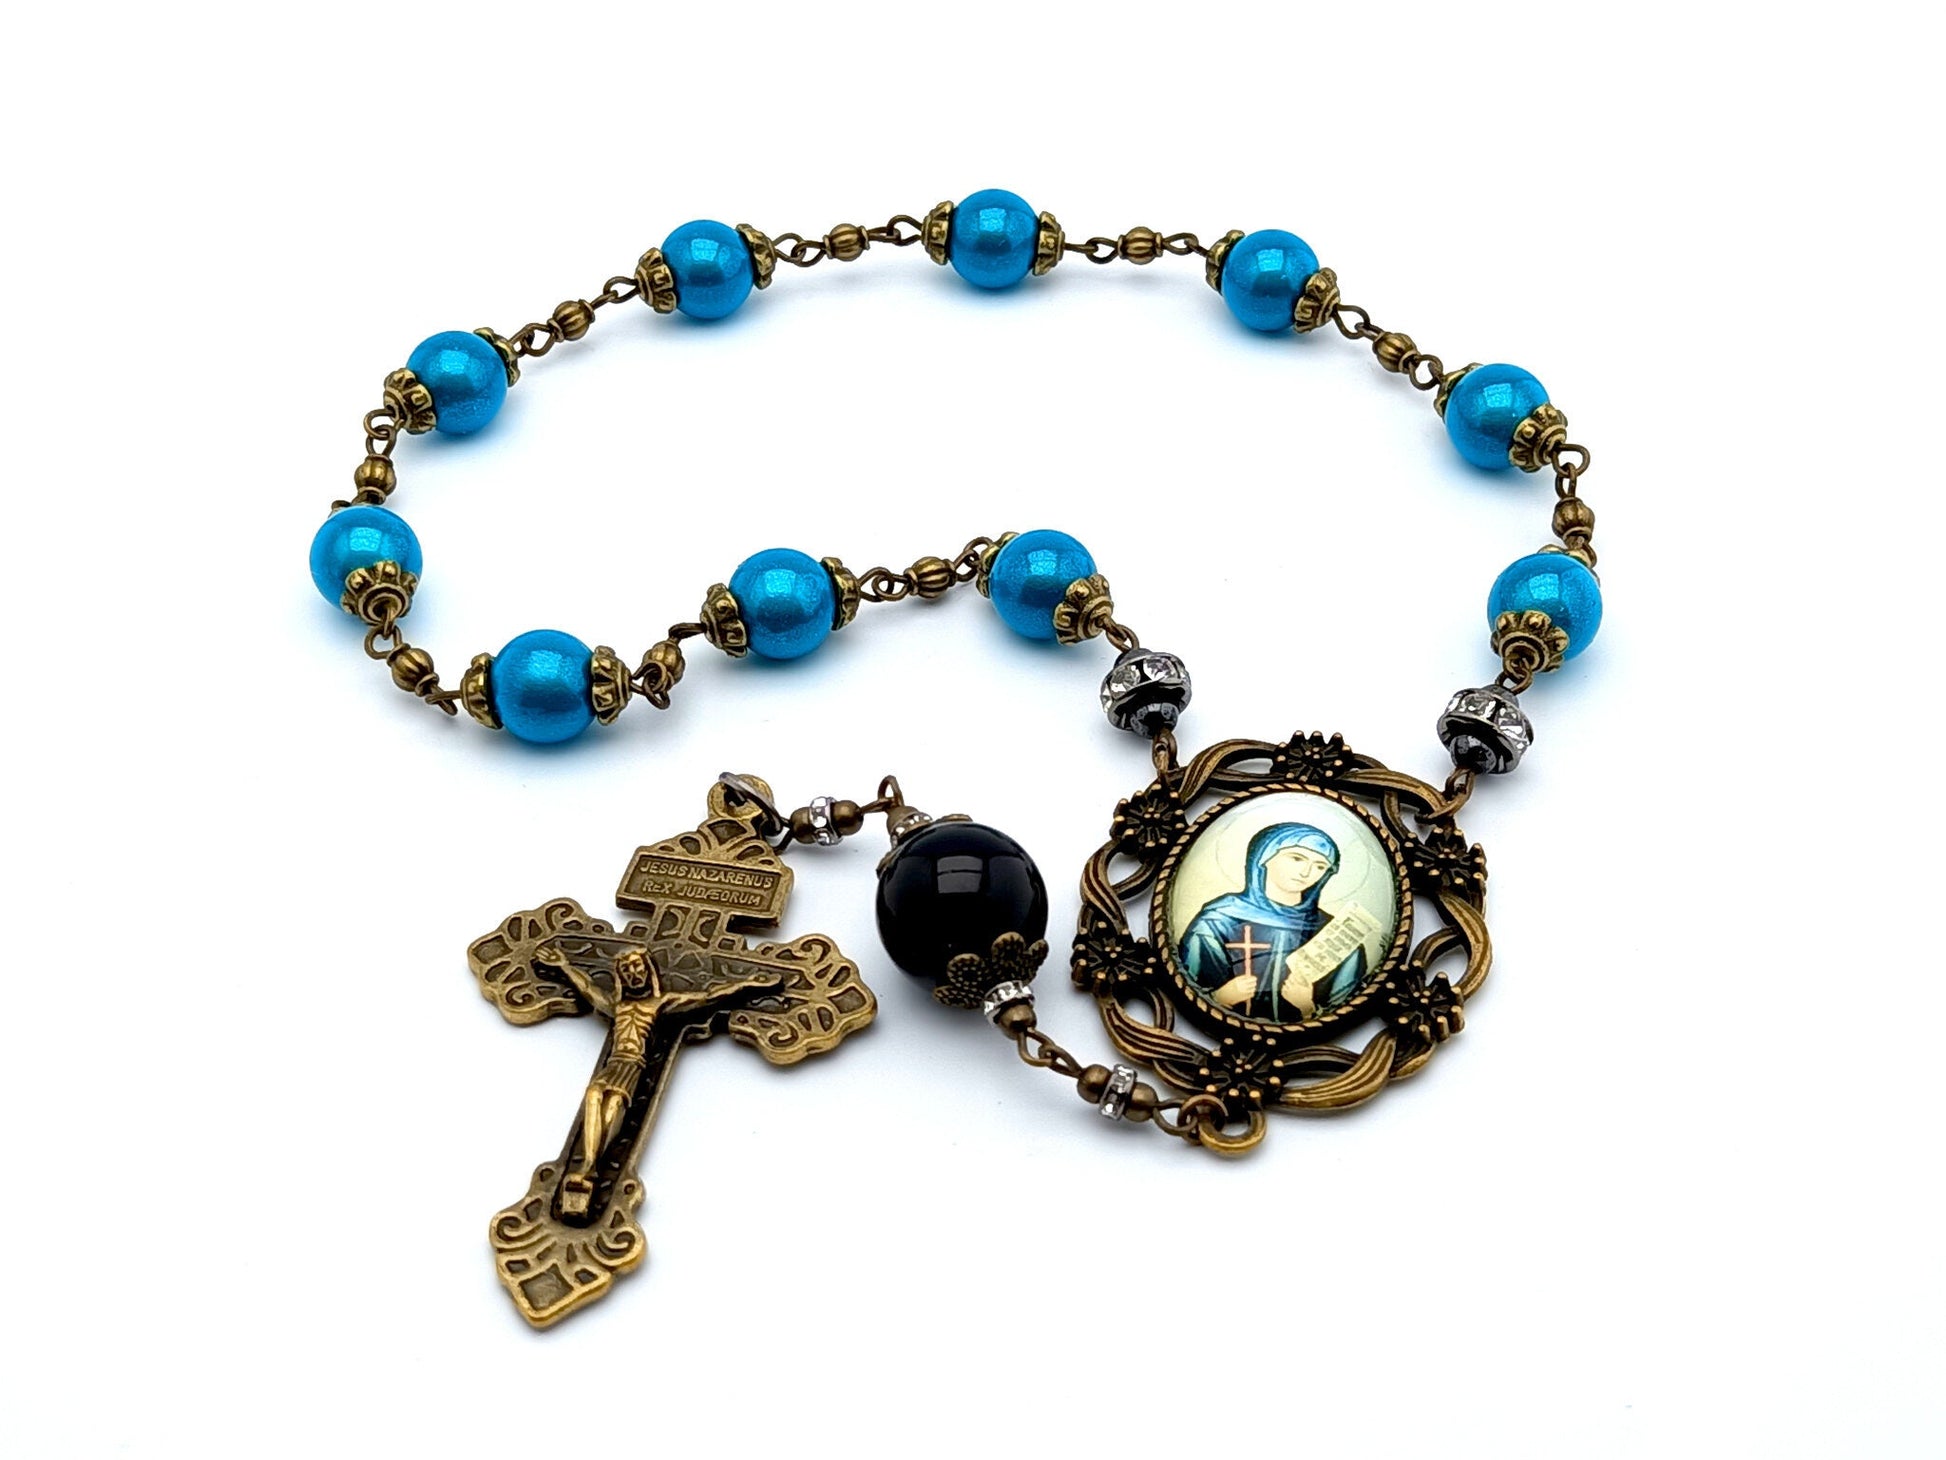 Saint Monica unique rosary beads single decade rosary with blue acrylic and onyx beads, bronze pardon crucifix and centre medal.